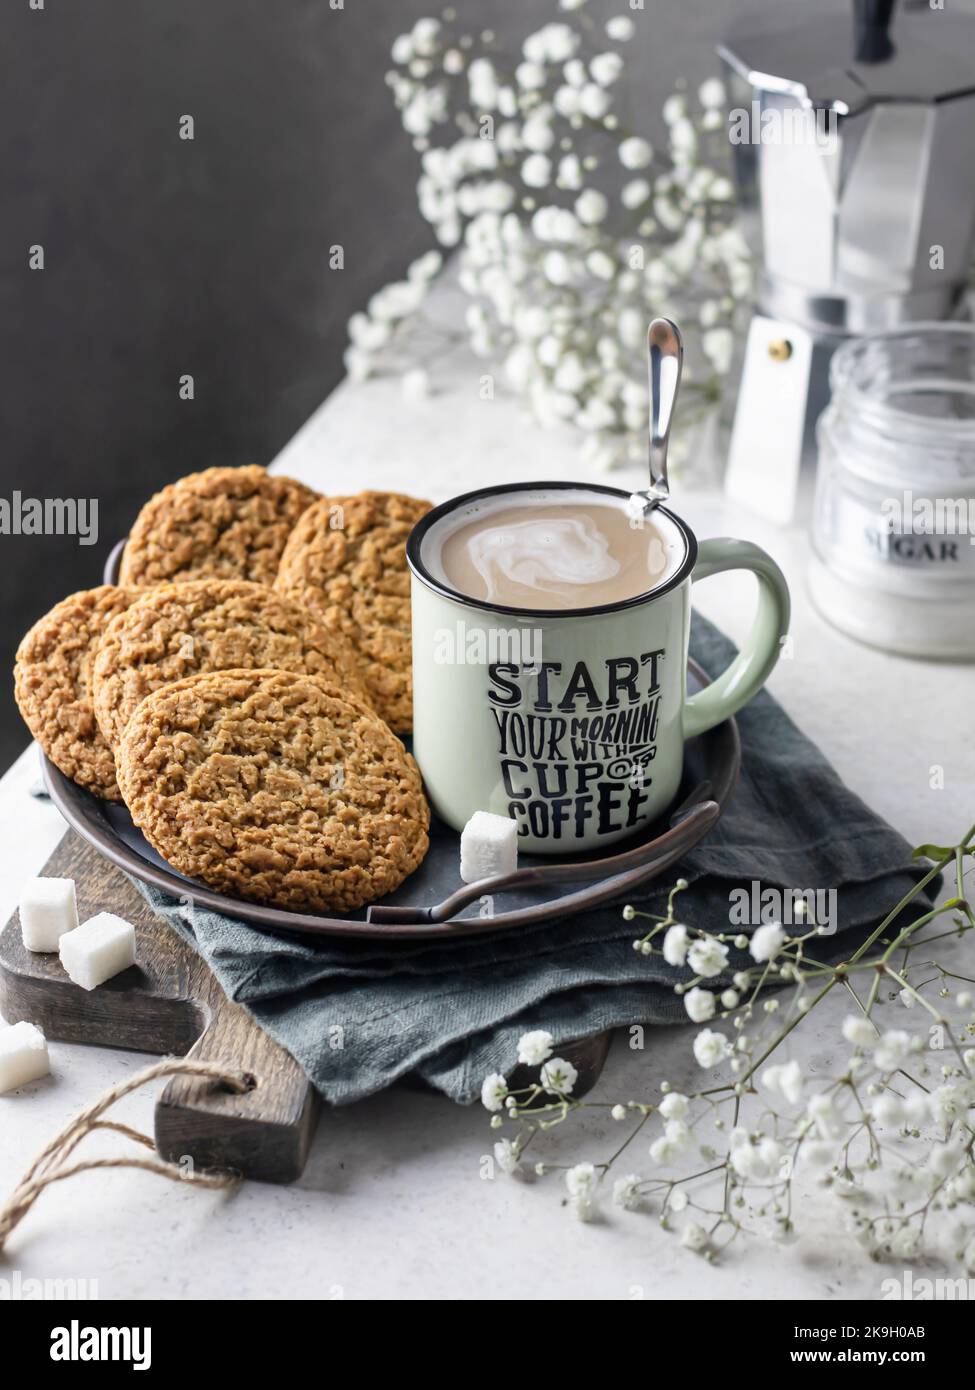 Mug of hot coffee with homemade oatmeal cookies on a rustic metal tray. Home warmth and comfort in autumn morning concept. Autumn still life Stock Photo